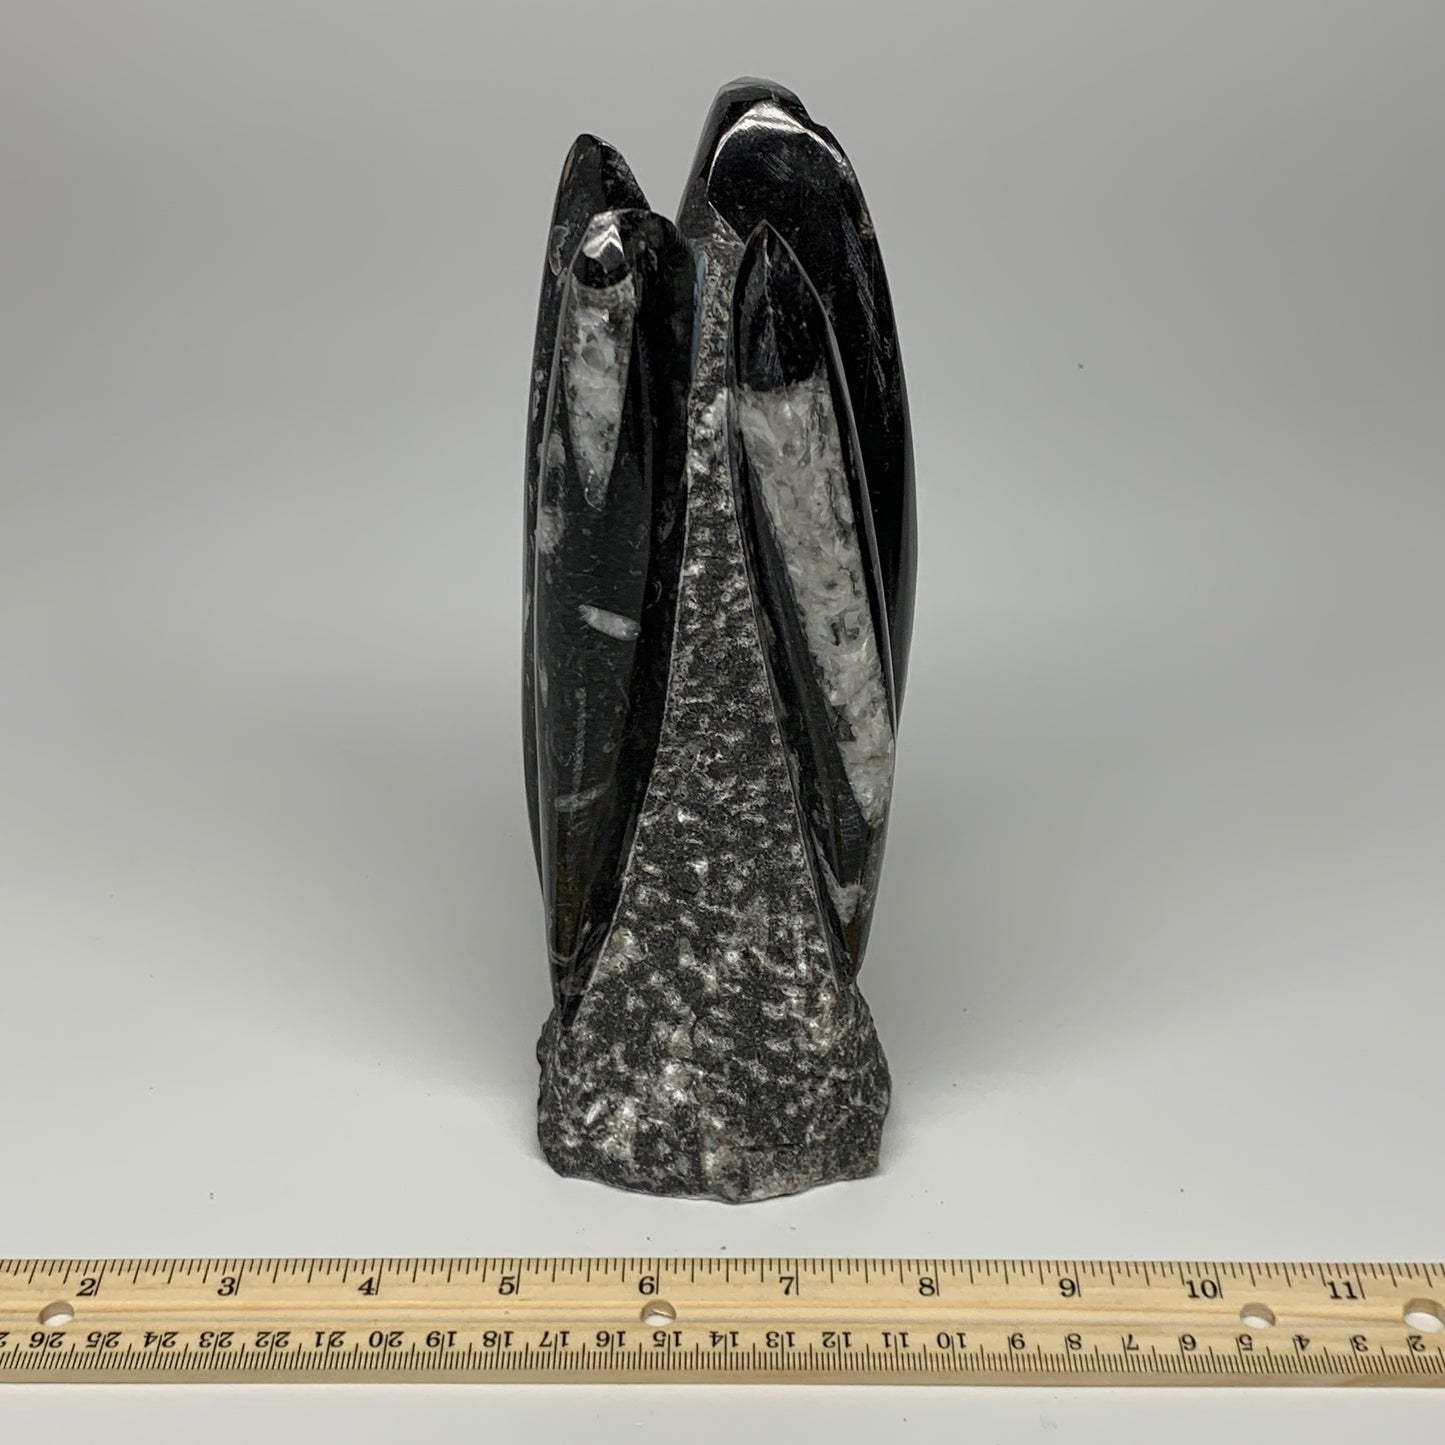 1325g, 7.5"x3.3"x3" Black Fossils Orthoceras Sculpture Tower @Morocco, B23412